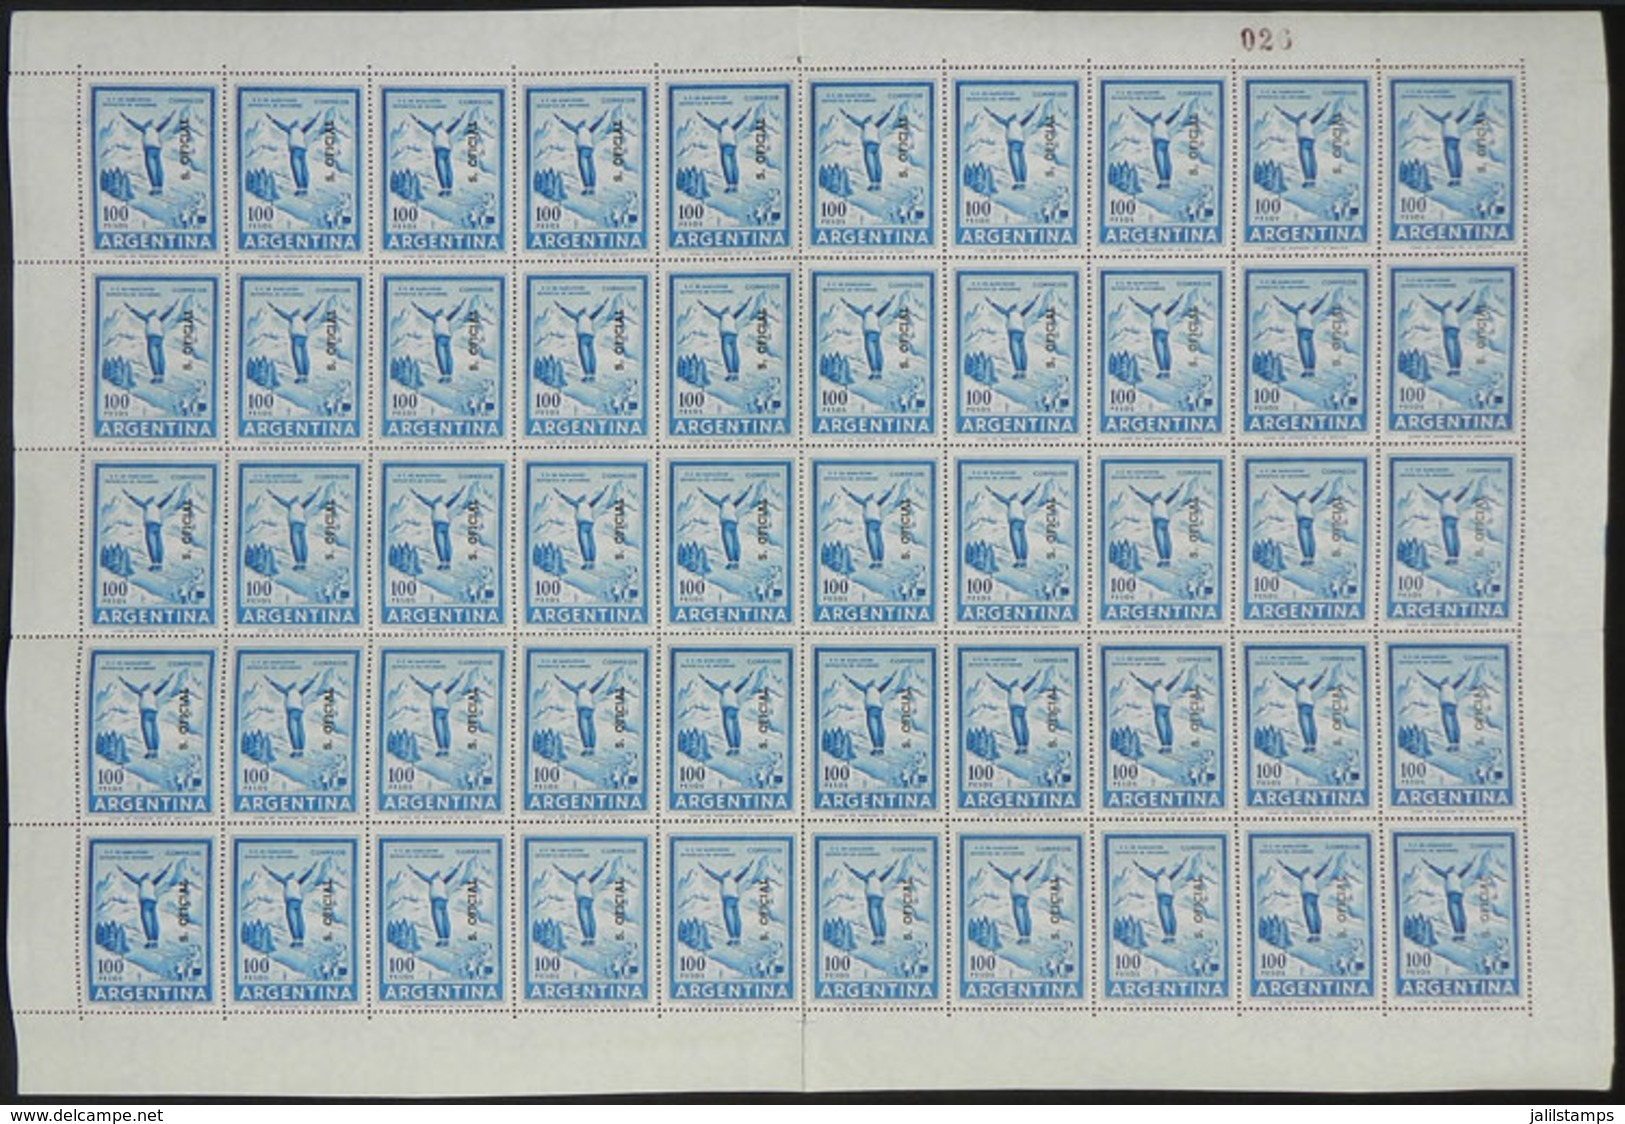 ARGENTINA: GJ.774, 100P. Ski, On Imported Unsurfaced Paper, Complete Sheet Of 50 Stamps, MNH, Excellent And Very Rare! - Dienstmarken